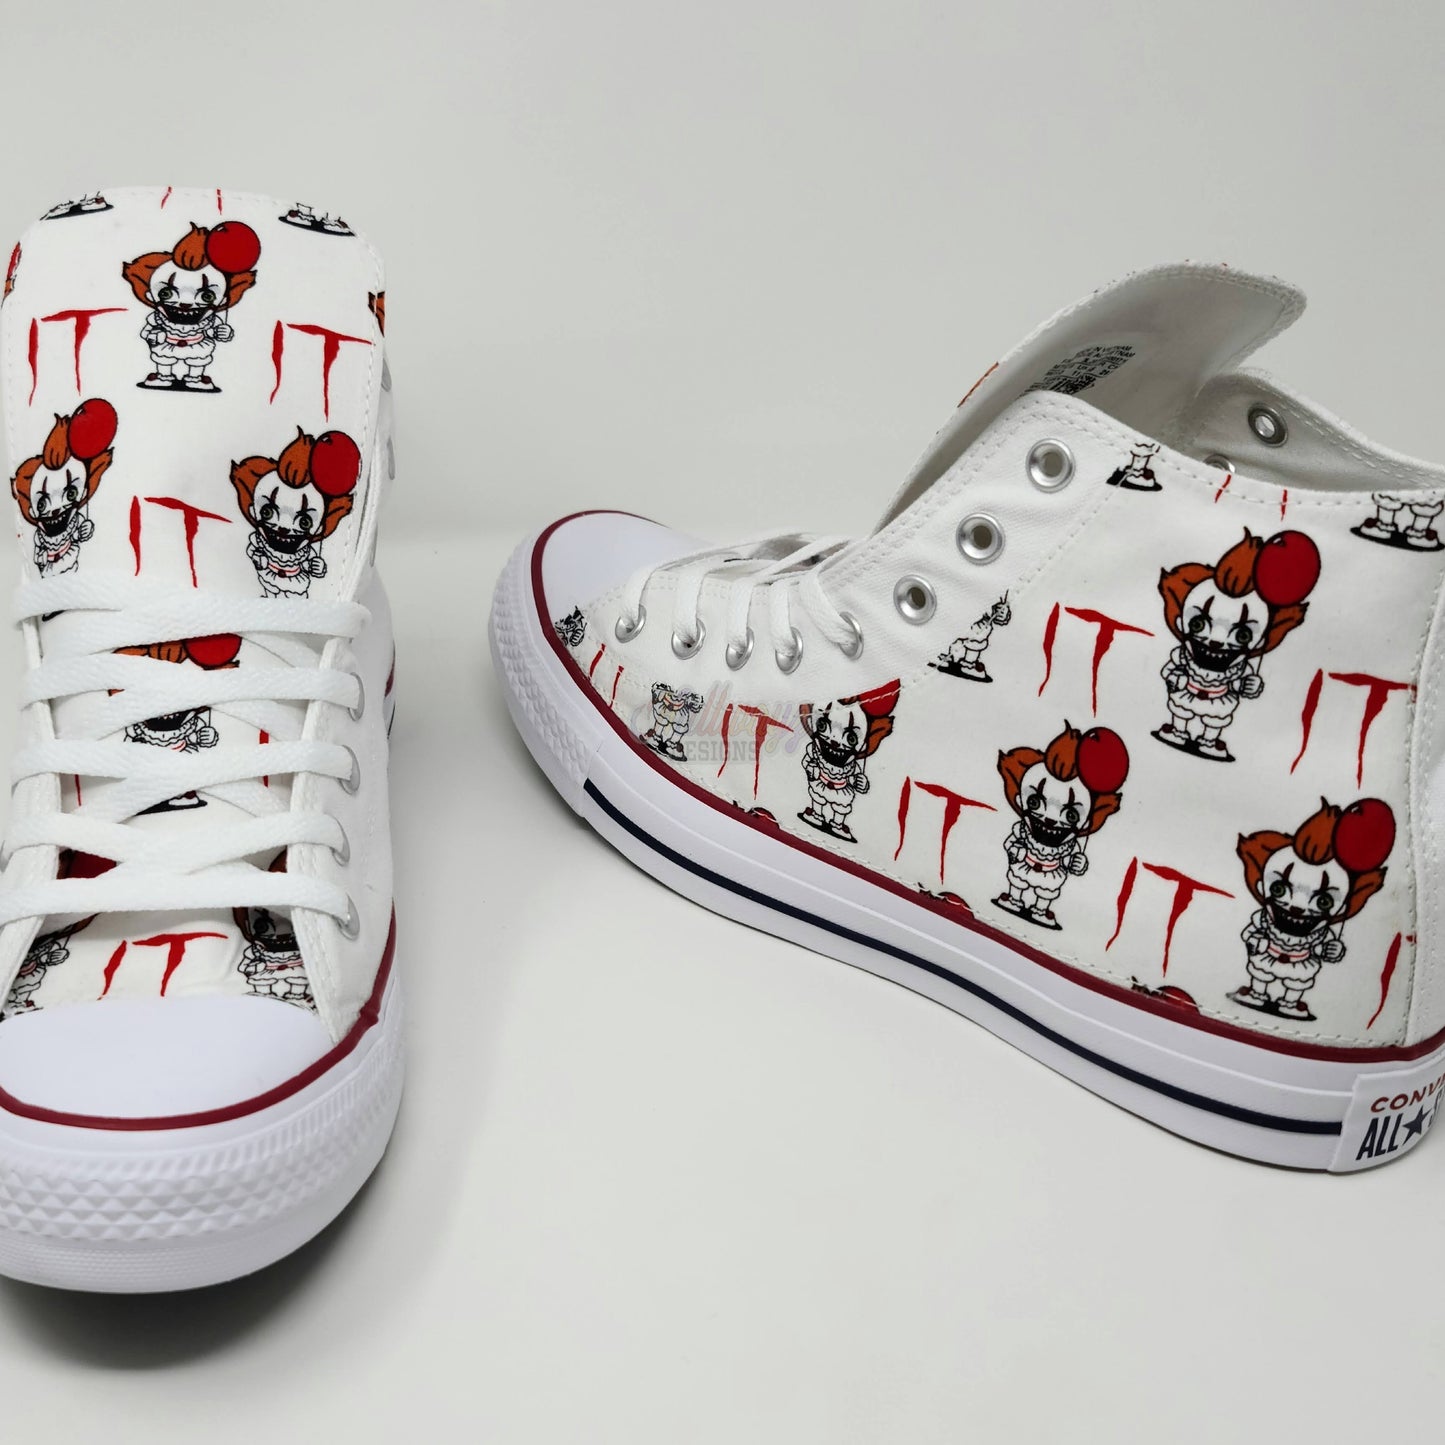 Size 11 men "It Pennywise Converse Shoes"- Ready to Ship